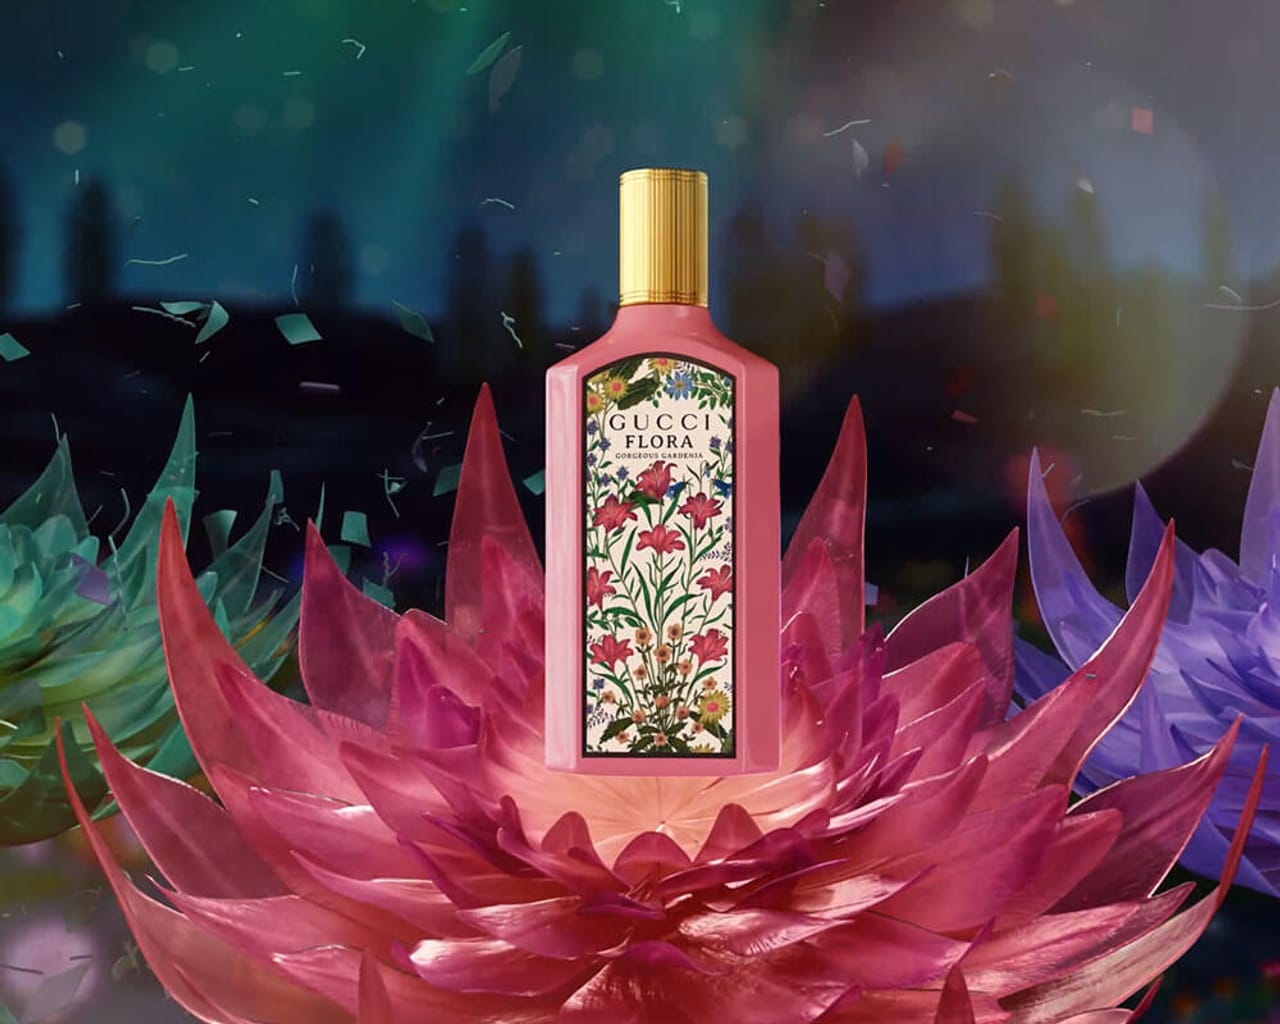 Gucci flora bottle appearing out of a flower